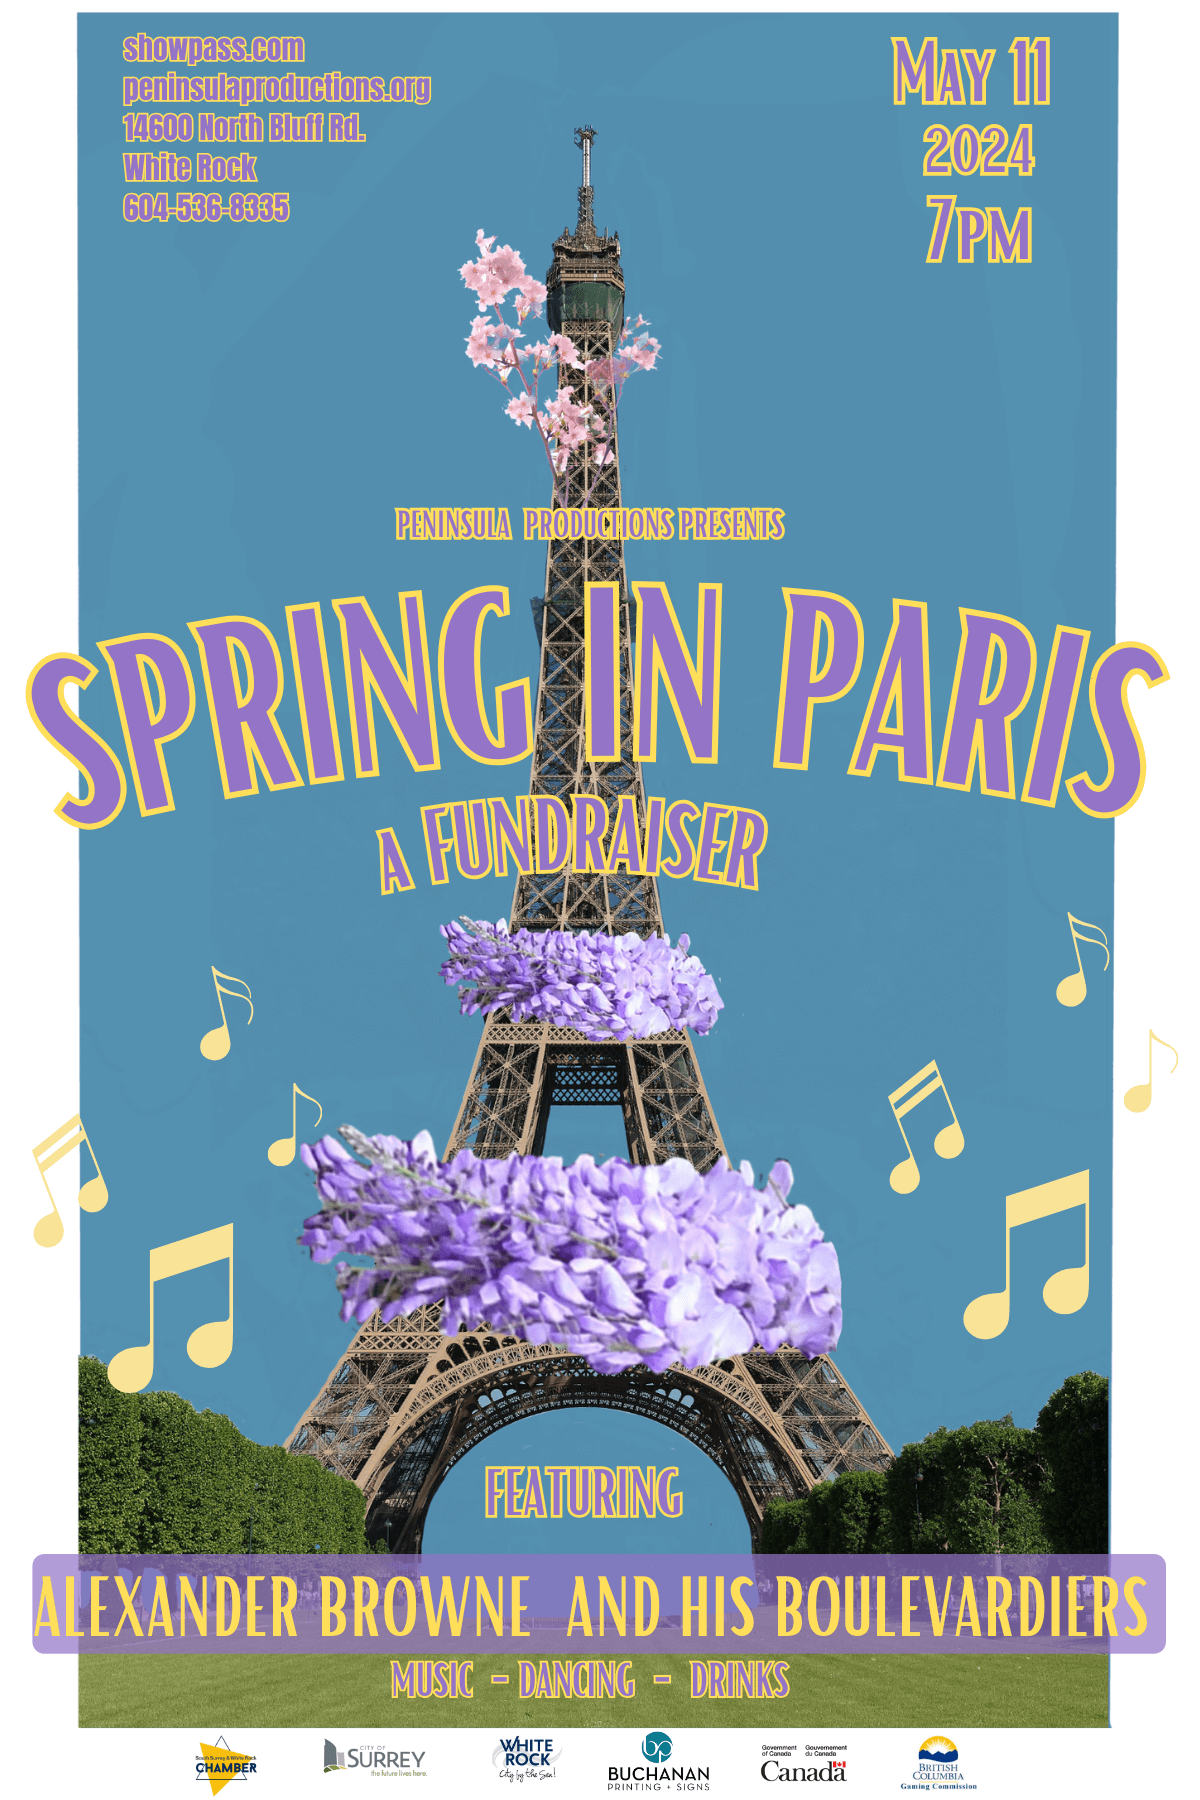 Updated poster for Spring In Paris - May 11, 2024